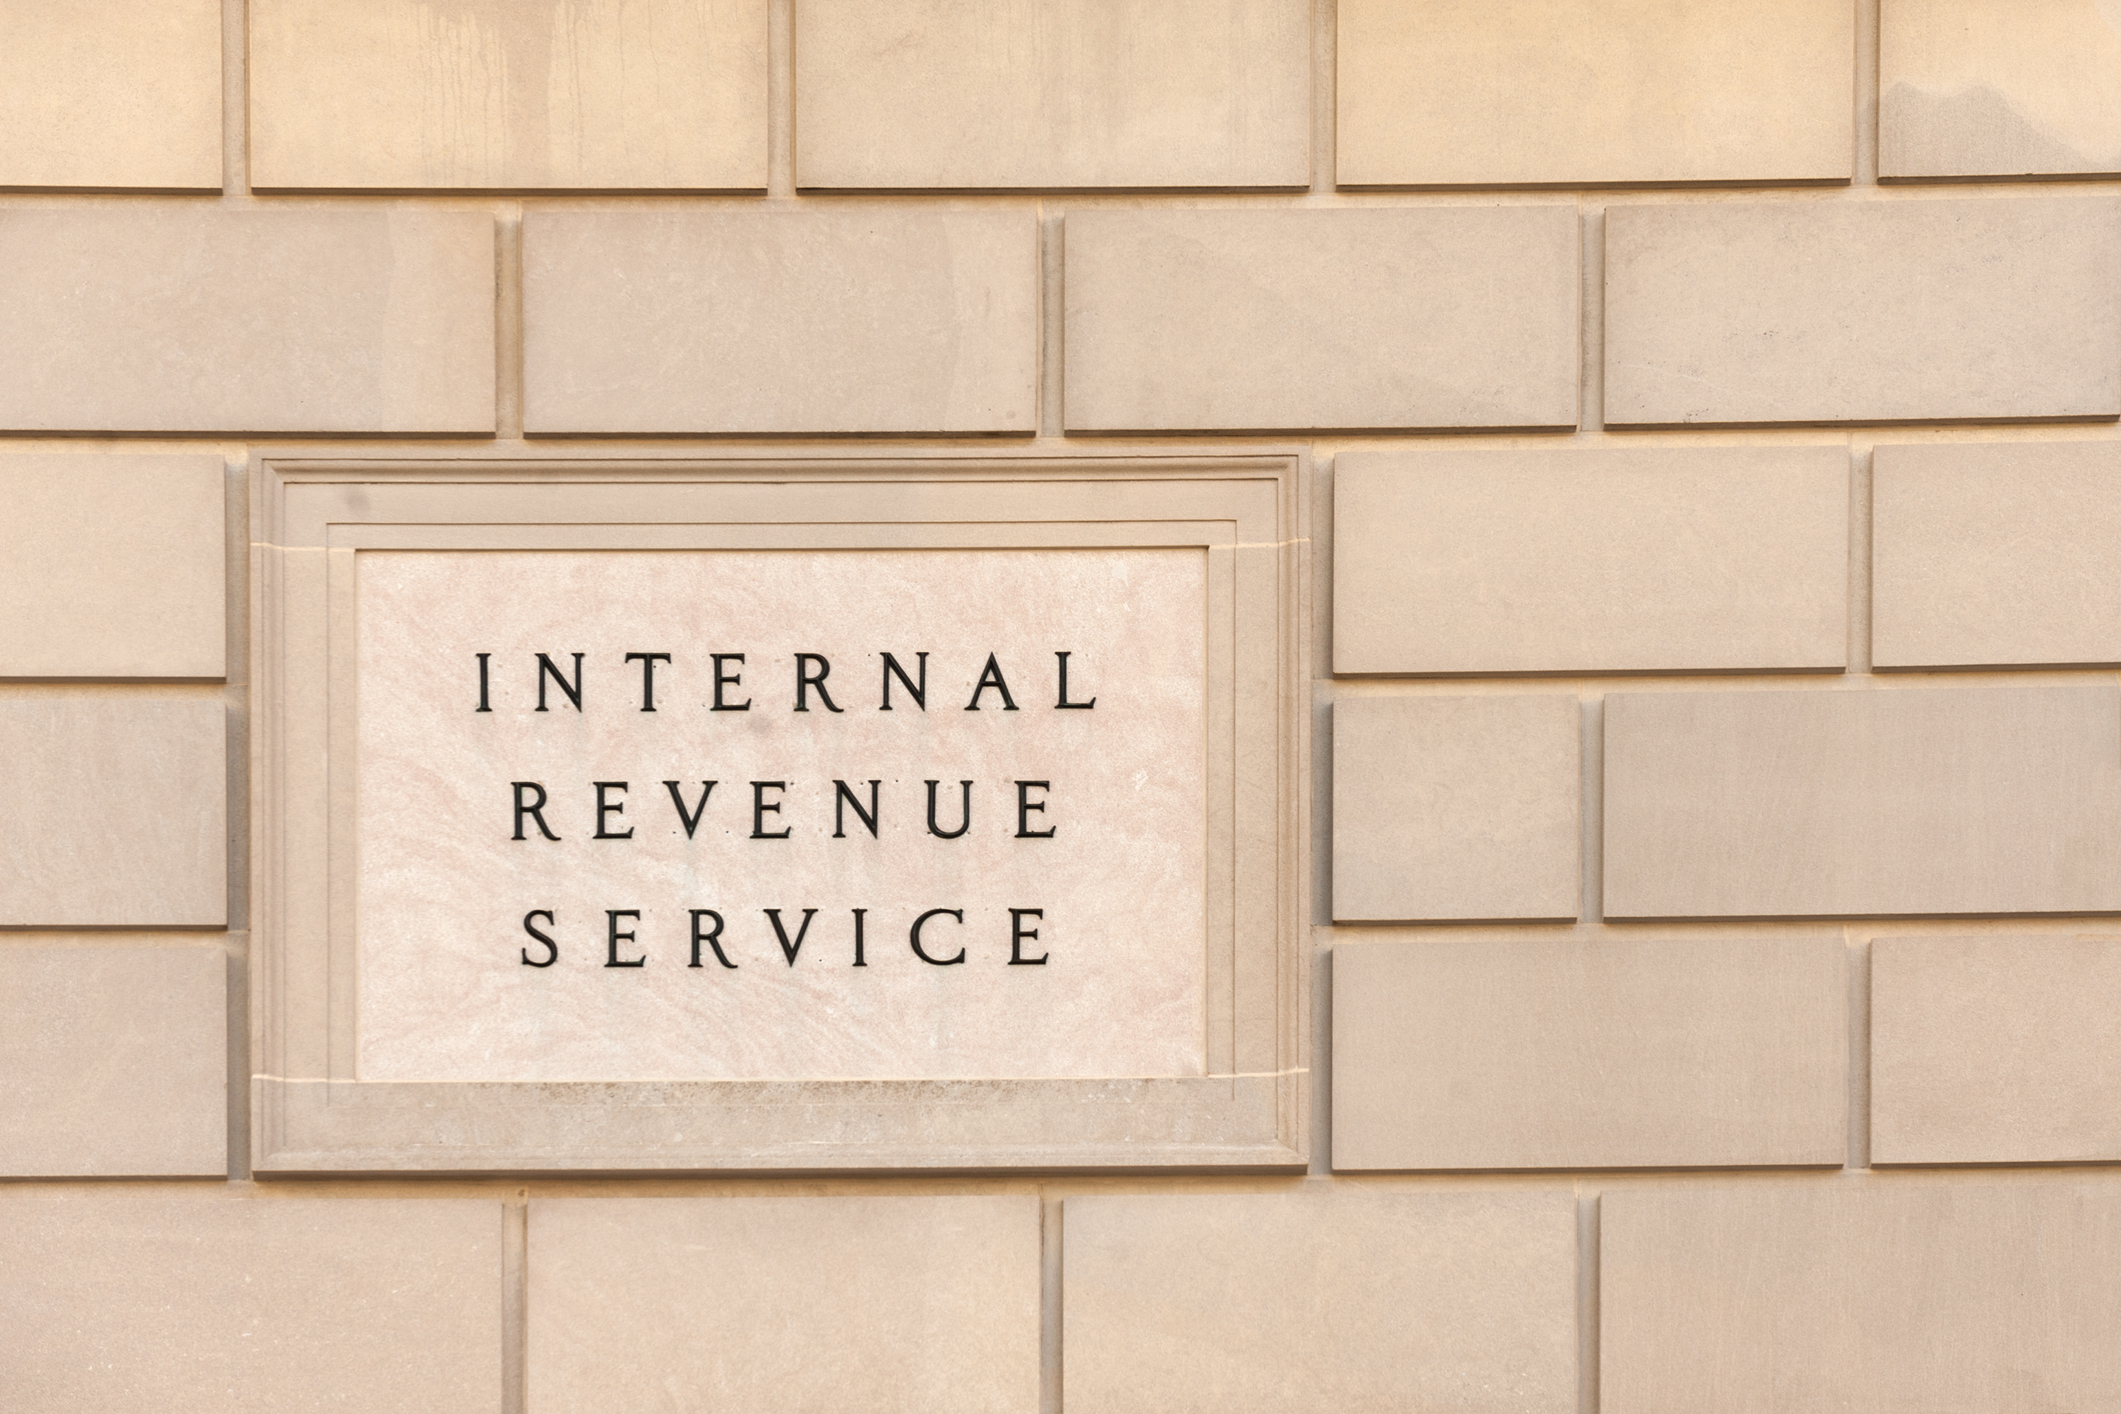 IRS Answers Questions About How the Government Shutdown Affected Audits